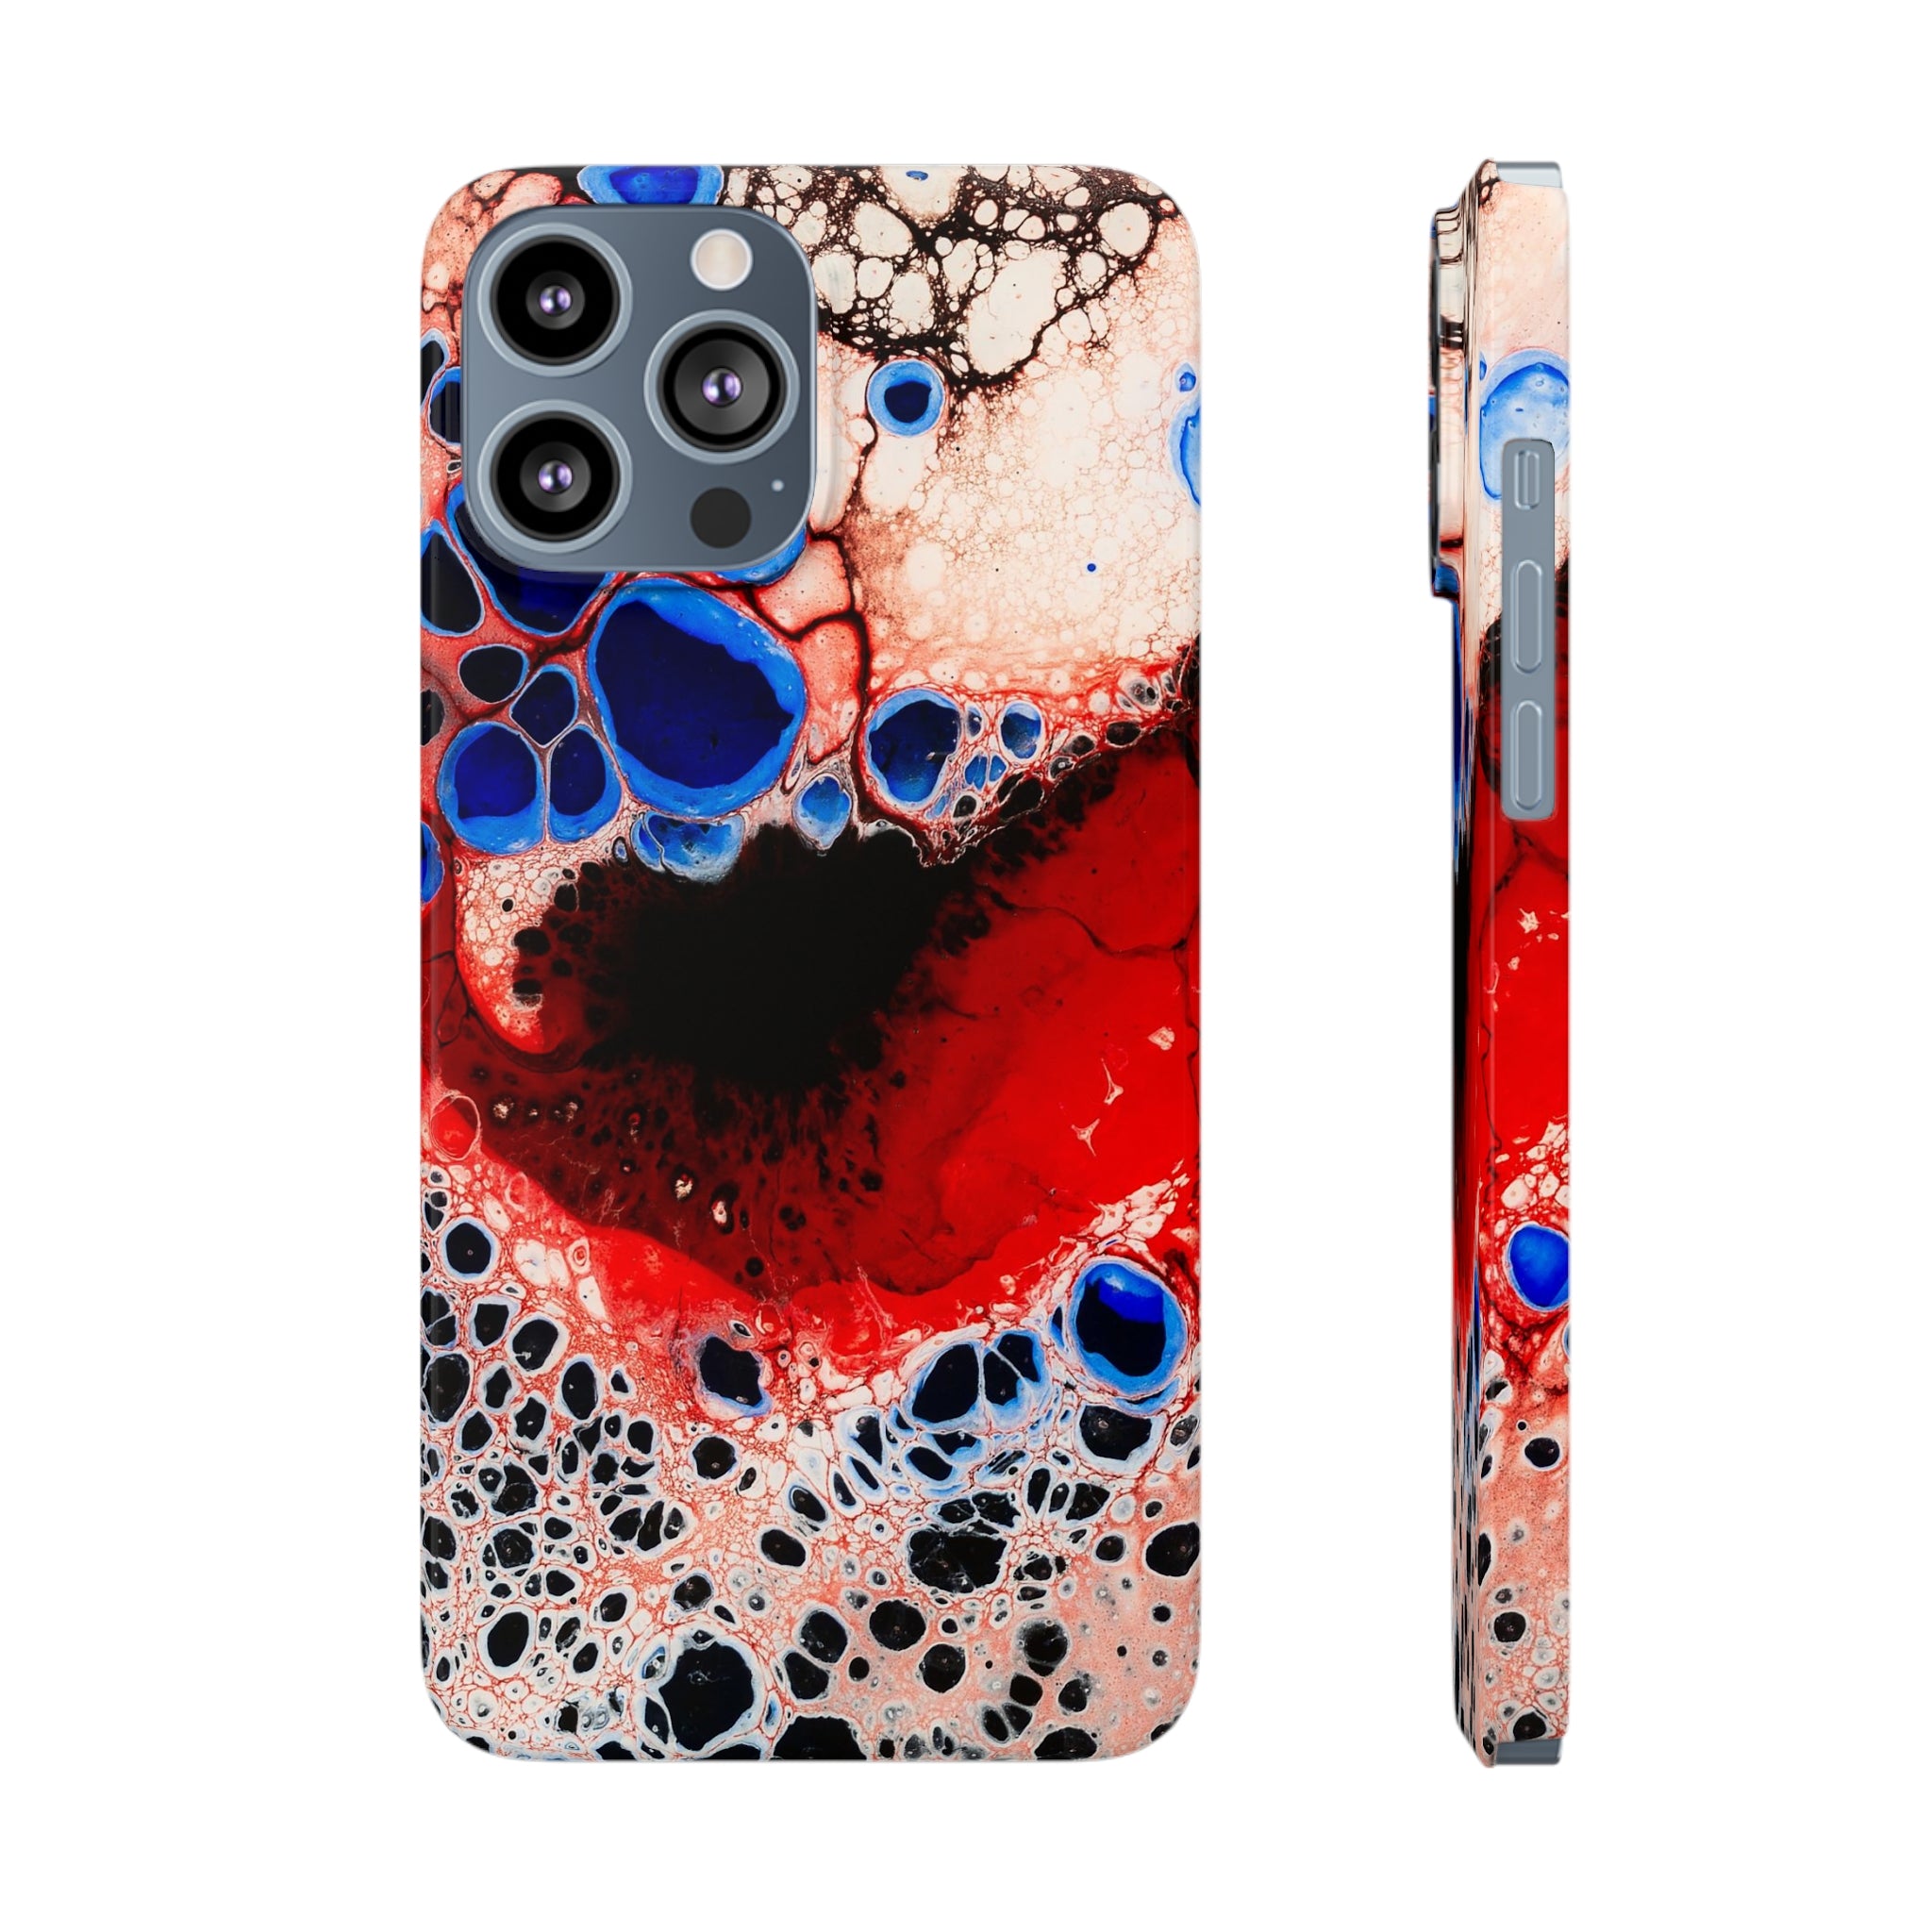 Abyss Of Emptiness - Slim Phone Cases